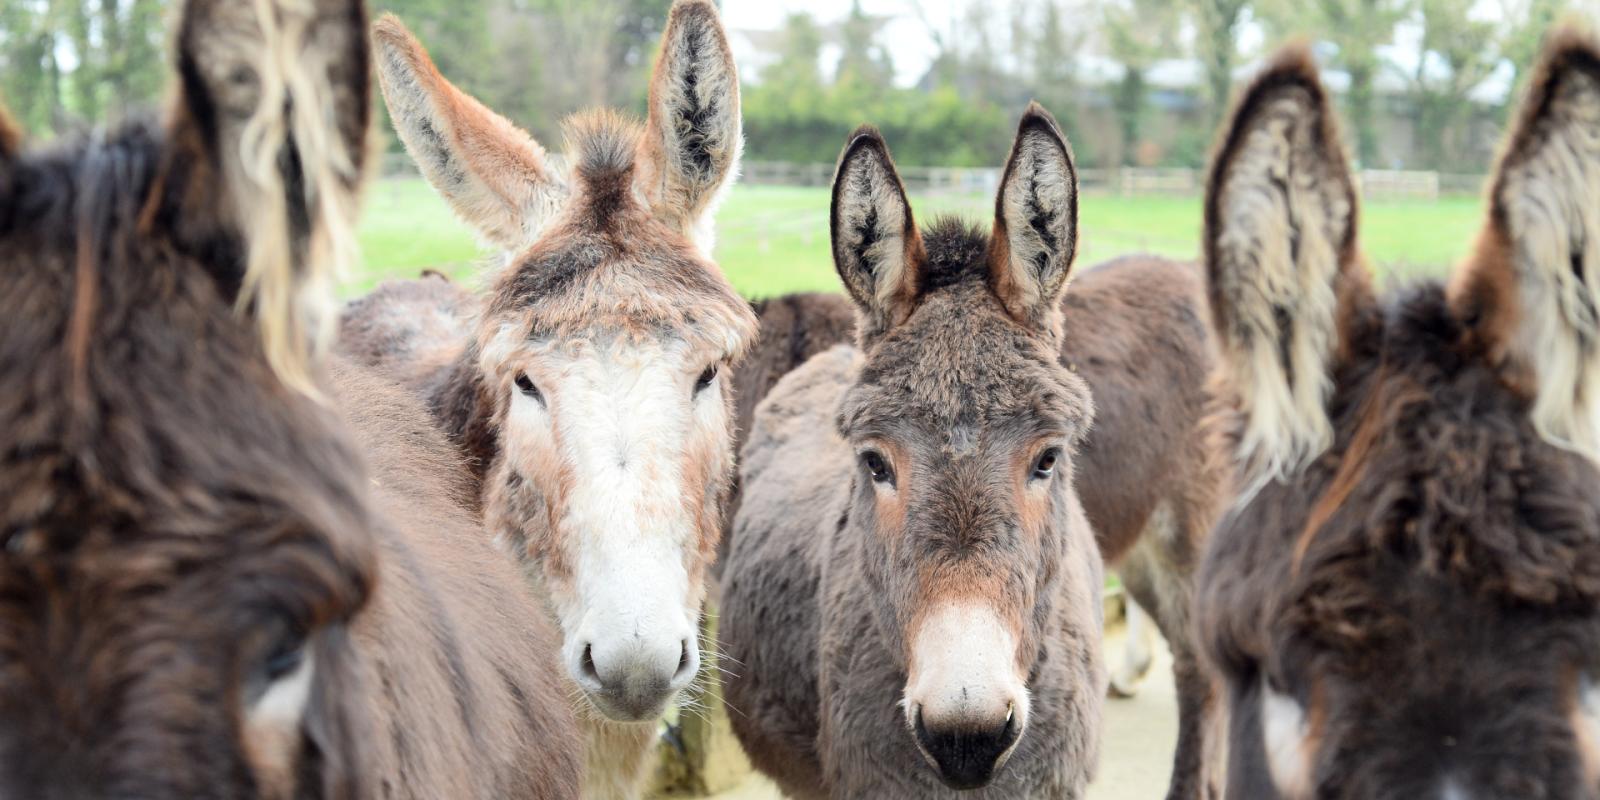 Donkey standing together in our care